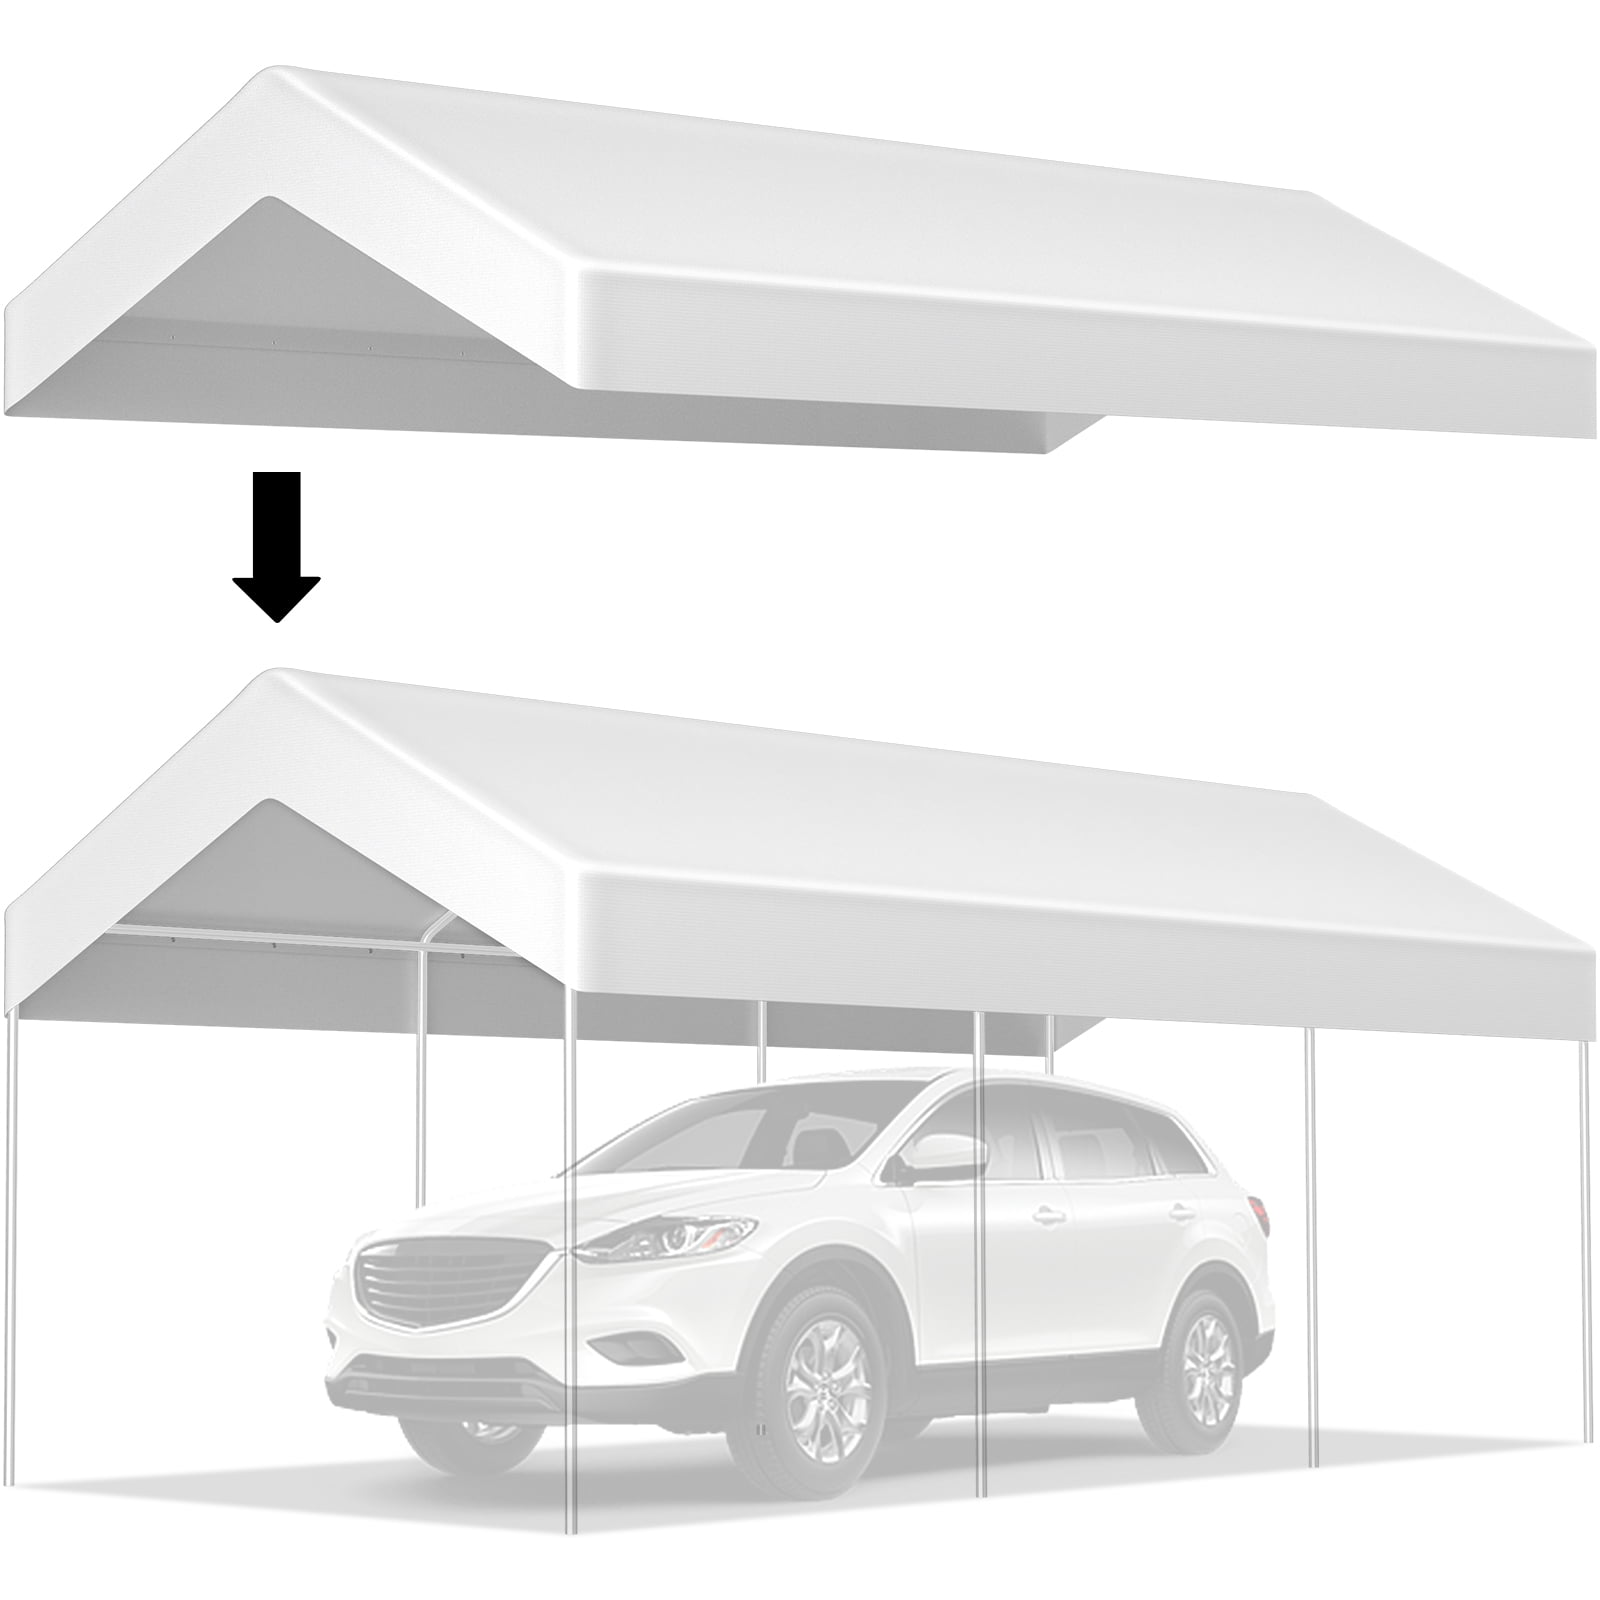 VEVOR Carport Replacement Canopy Cover, 10 x 20 ft, Triple-layer PE Fabric Garage Top Tarp Shelter Cover, UV Resistant Waterproof Car Cover Tent for Party, Garden, Boat (Frame is not Included) -